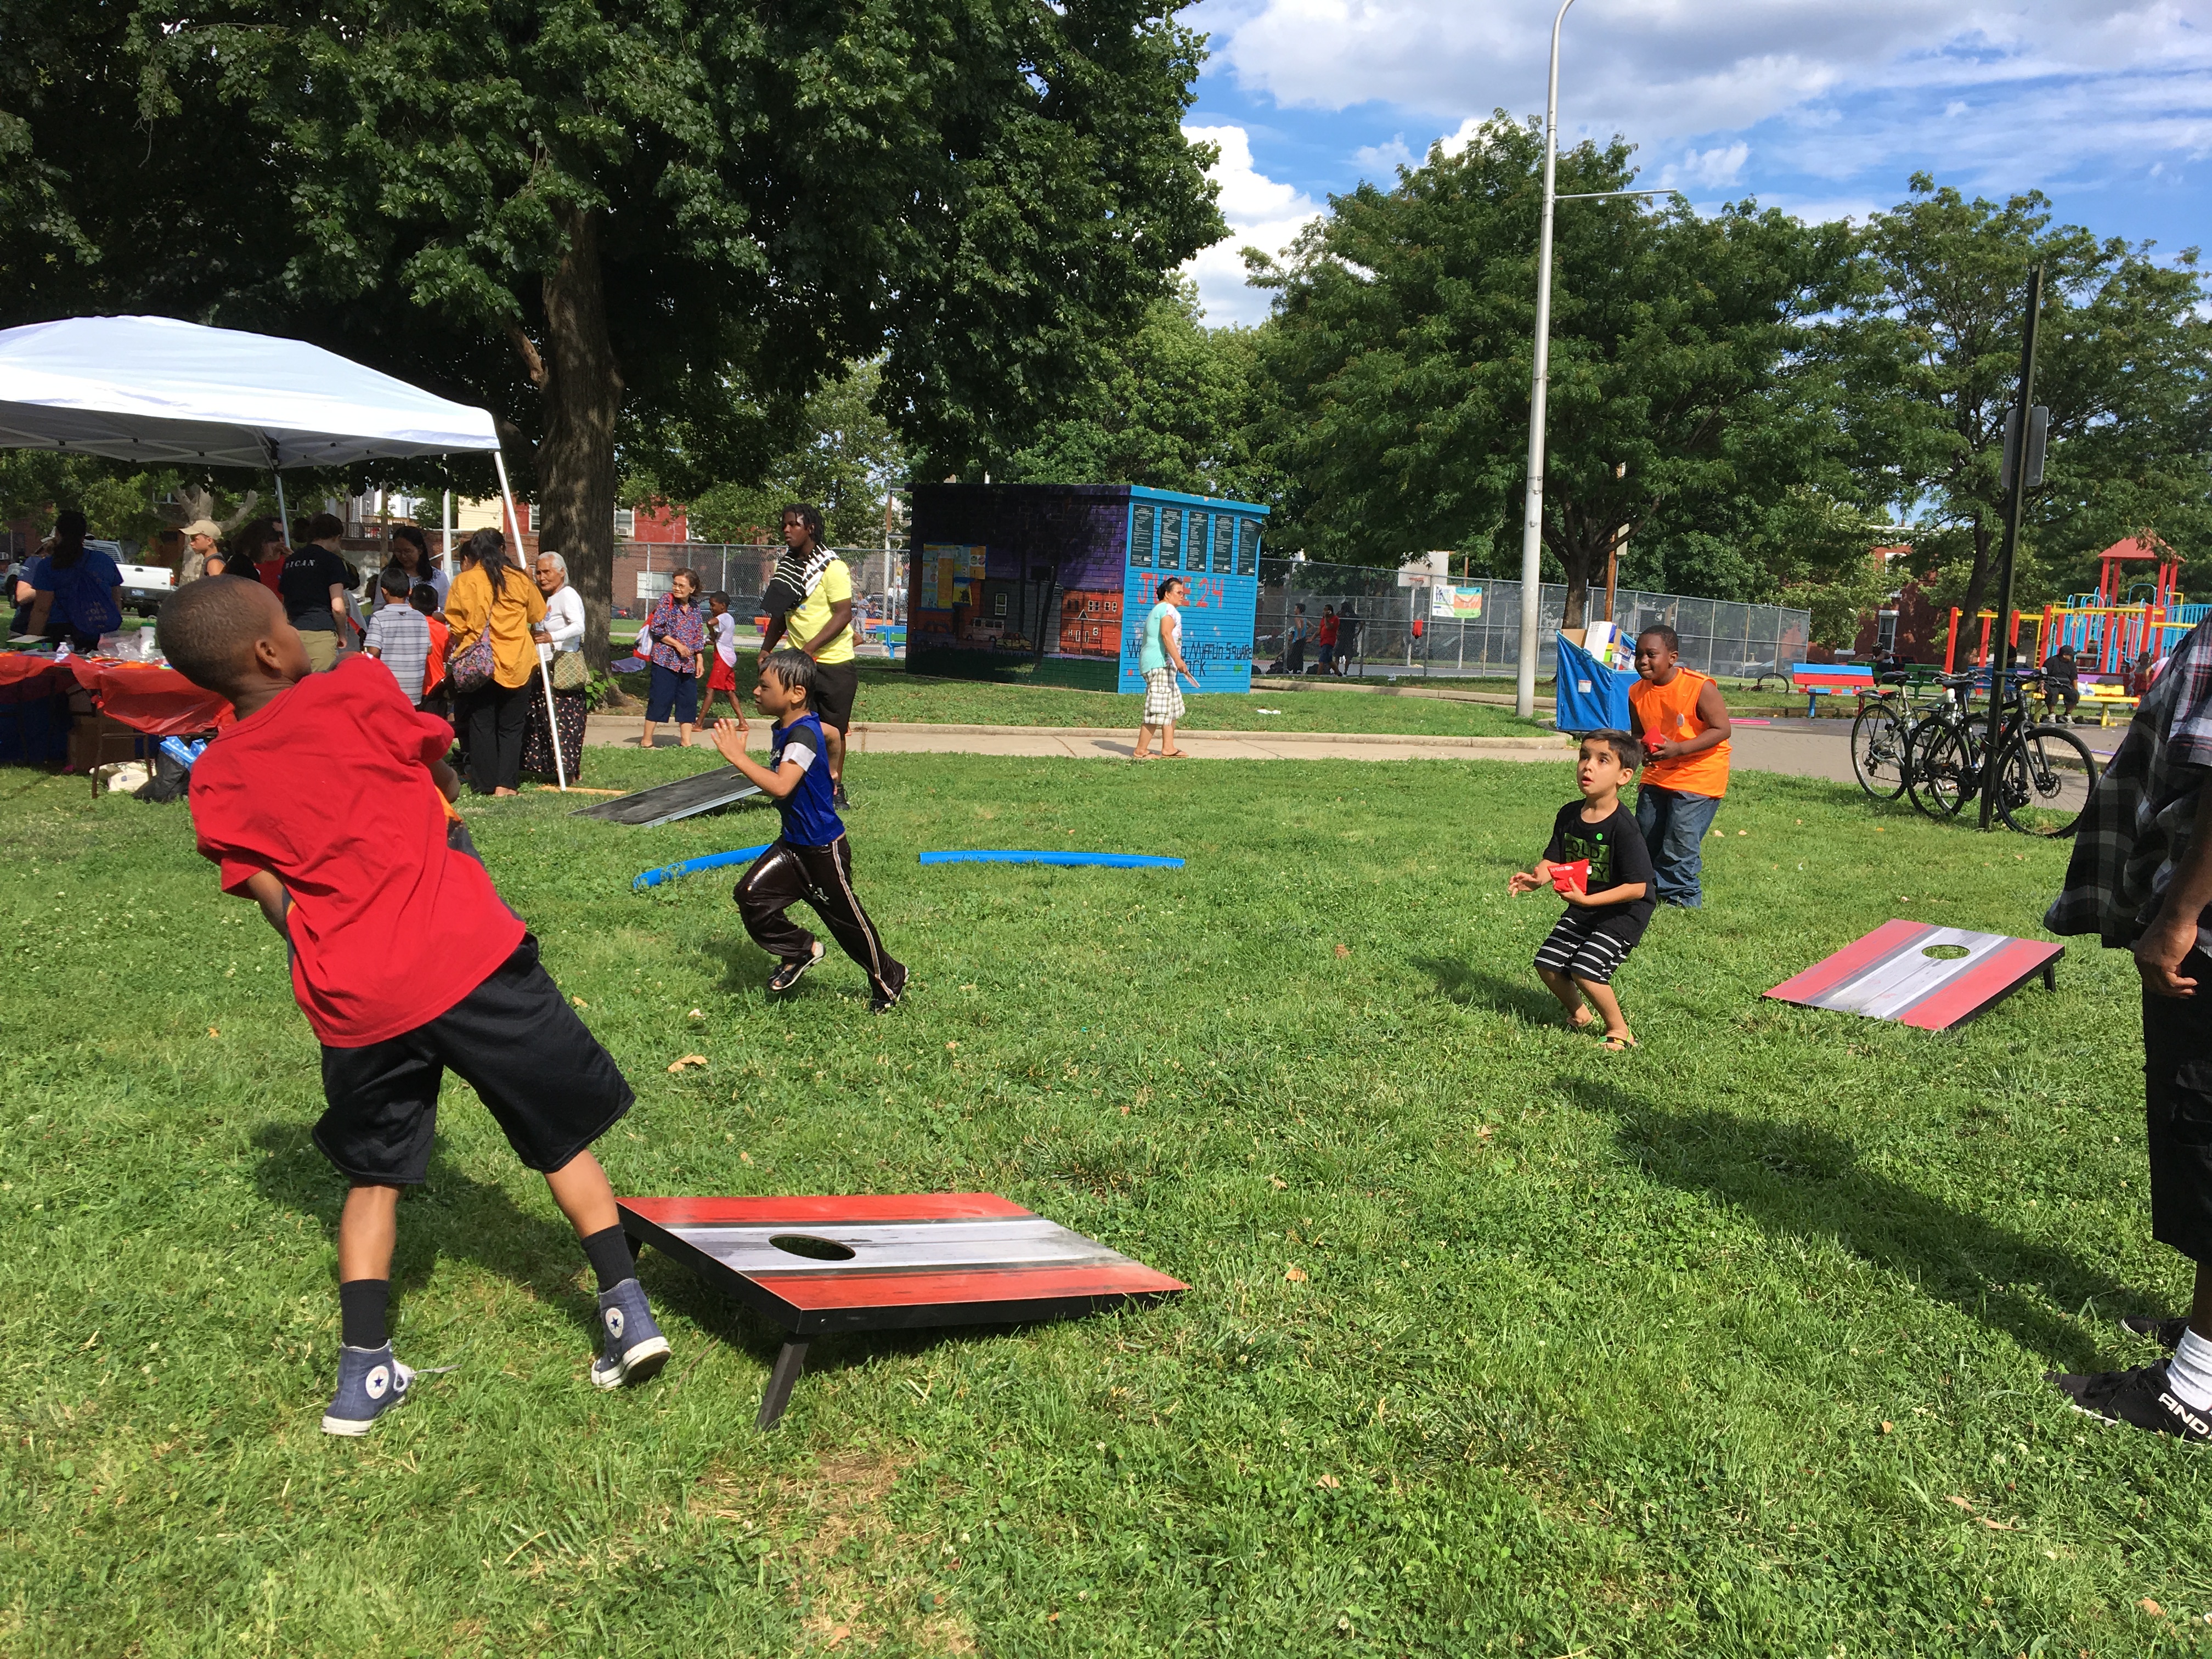 Games in Mifflin Square Park, June 2017 | Julia Bell / PlanPhilly